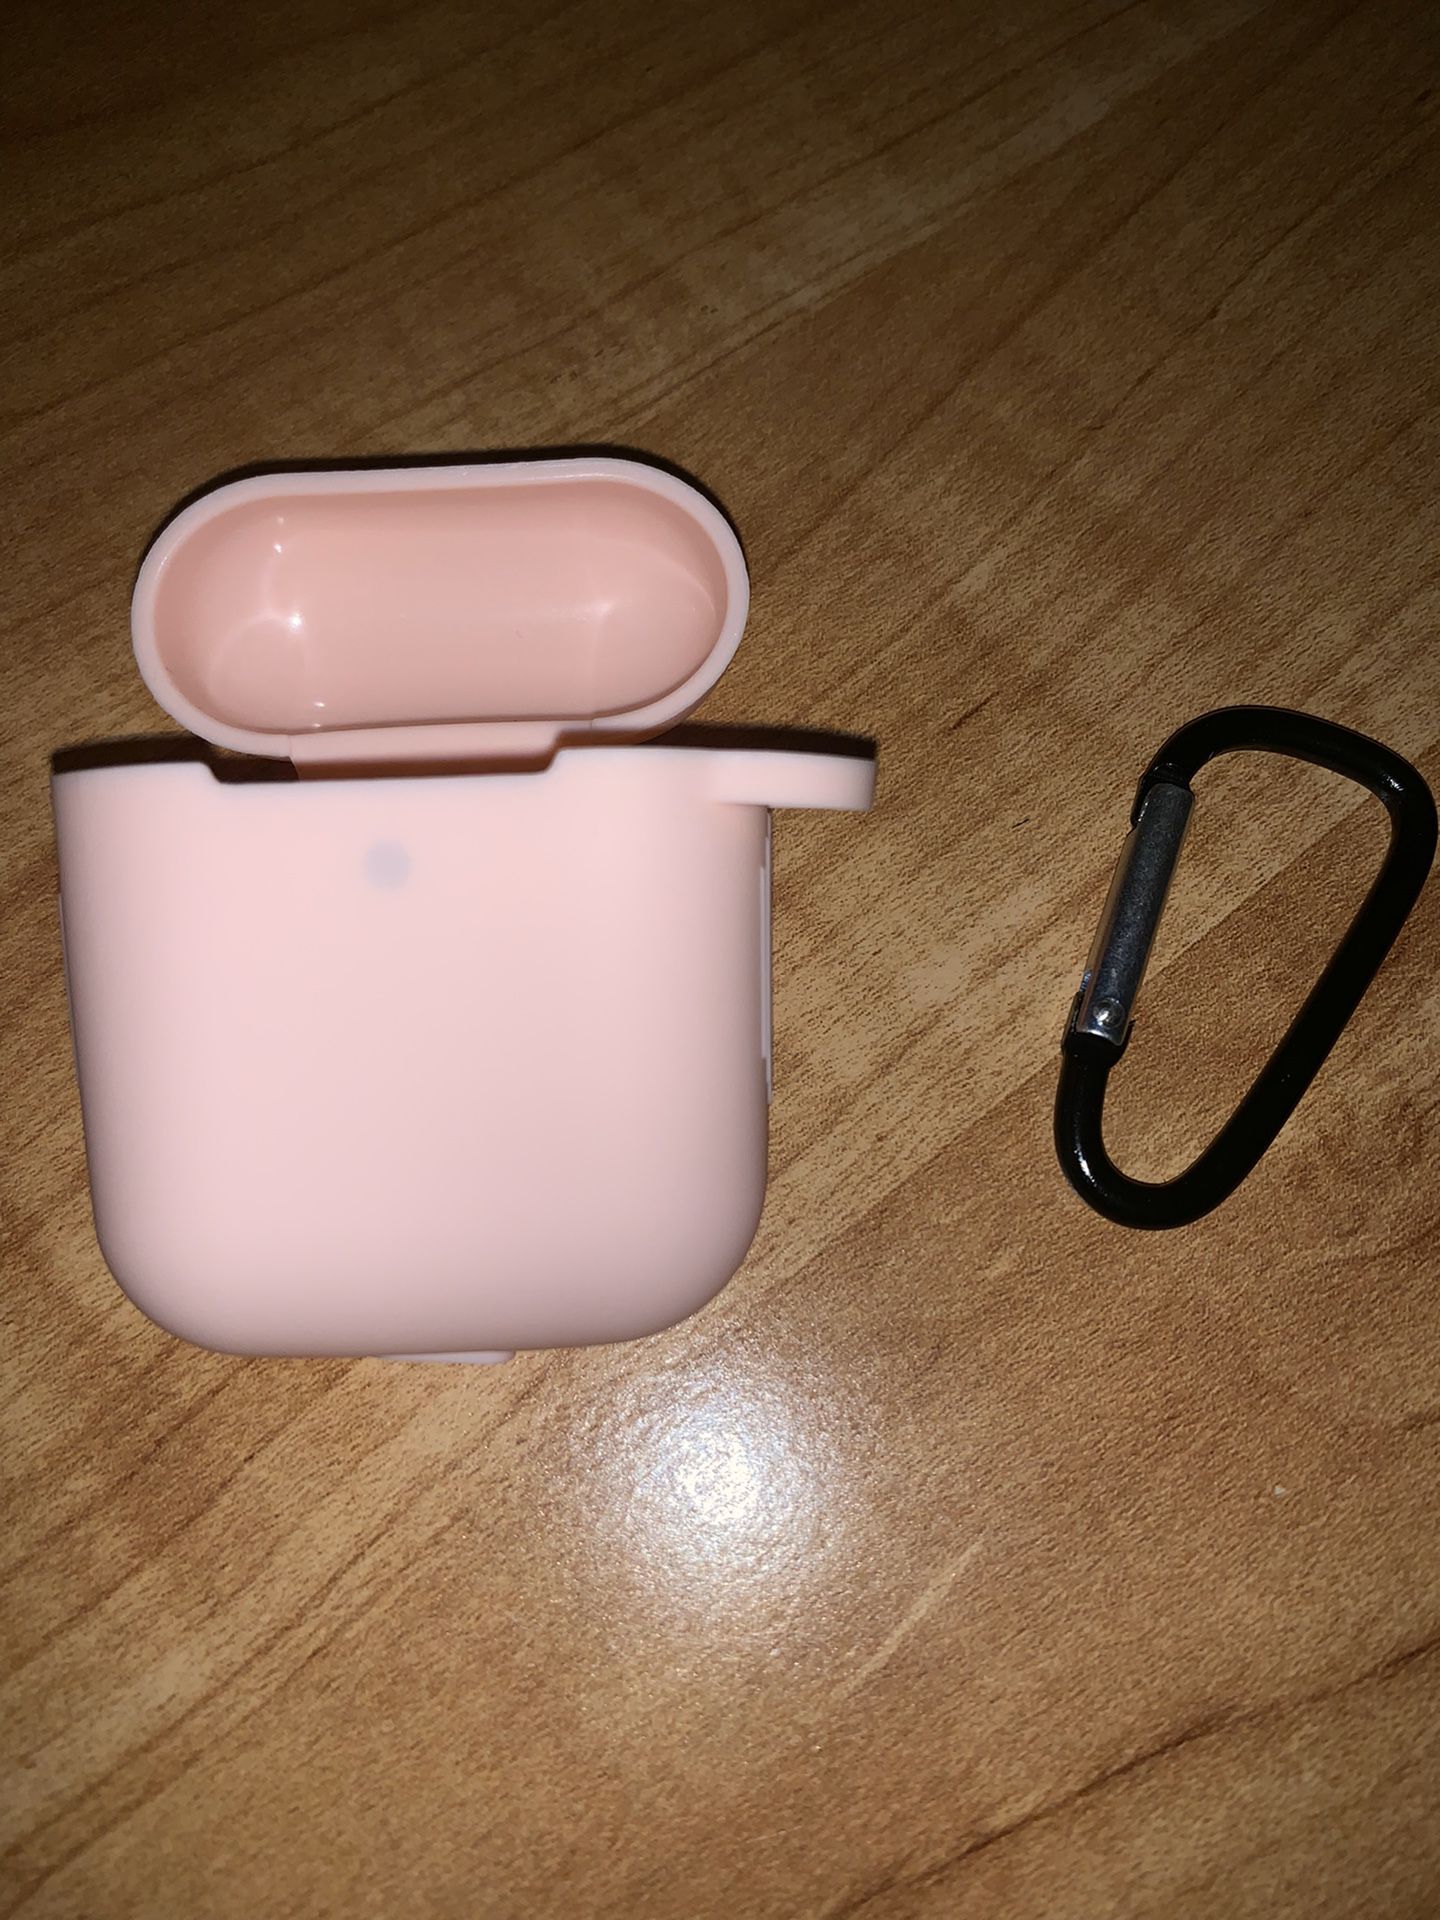 New Apple AirPods 1/2 Case